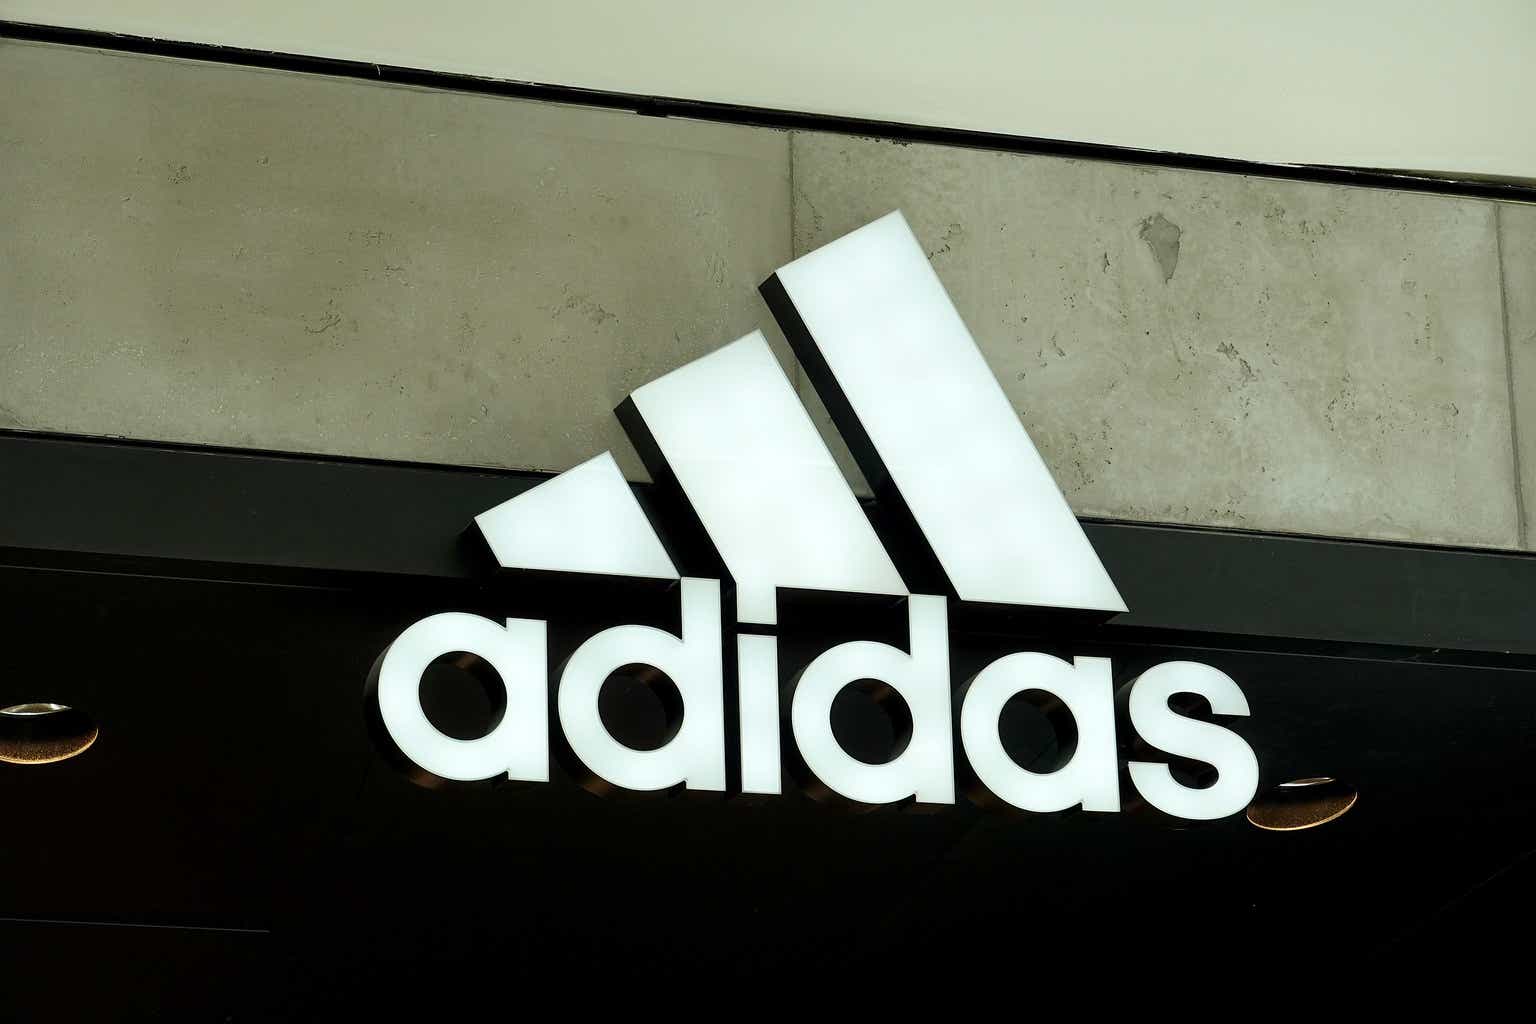 adidas - adidas with robust growth in the third quarter as